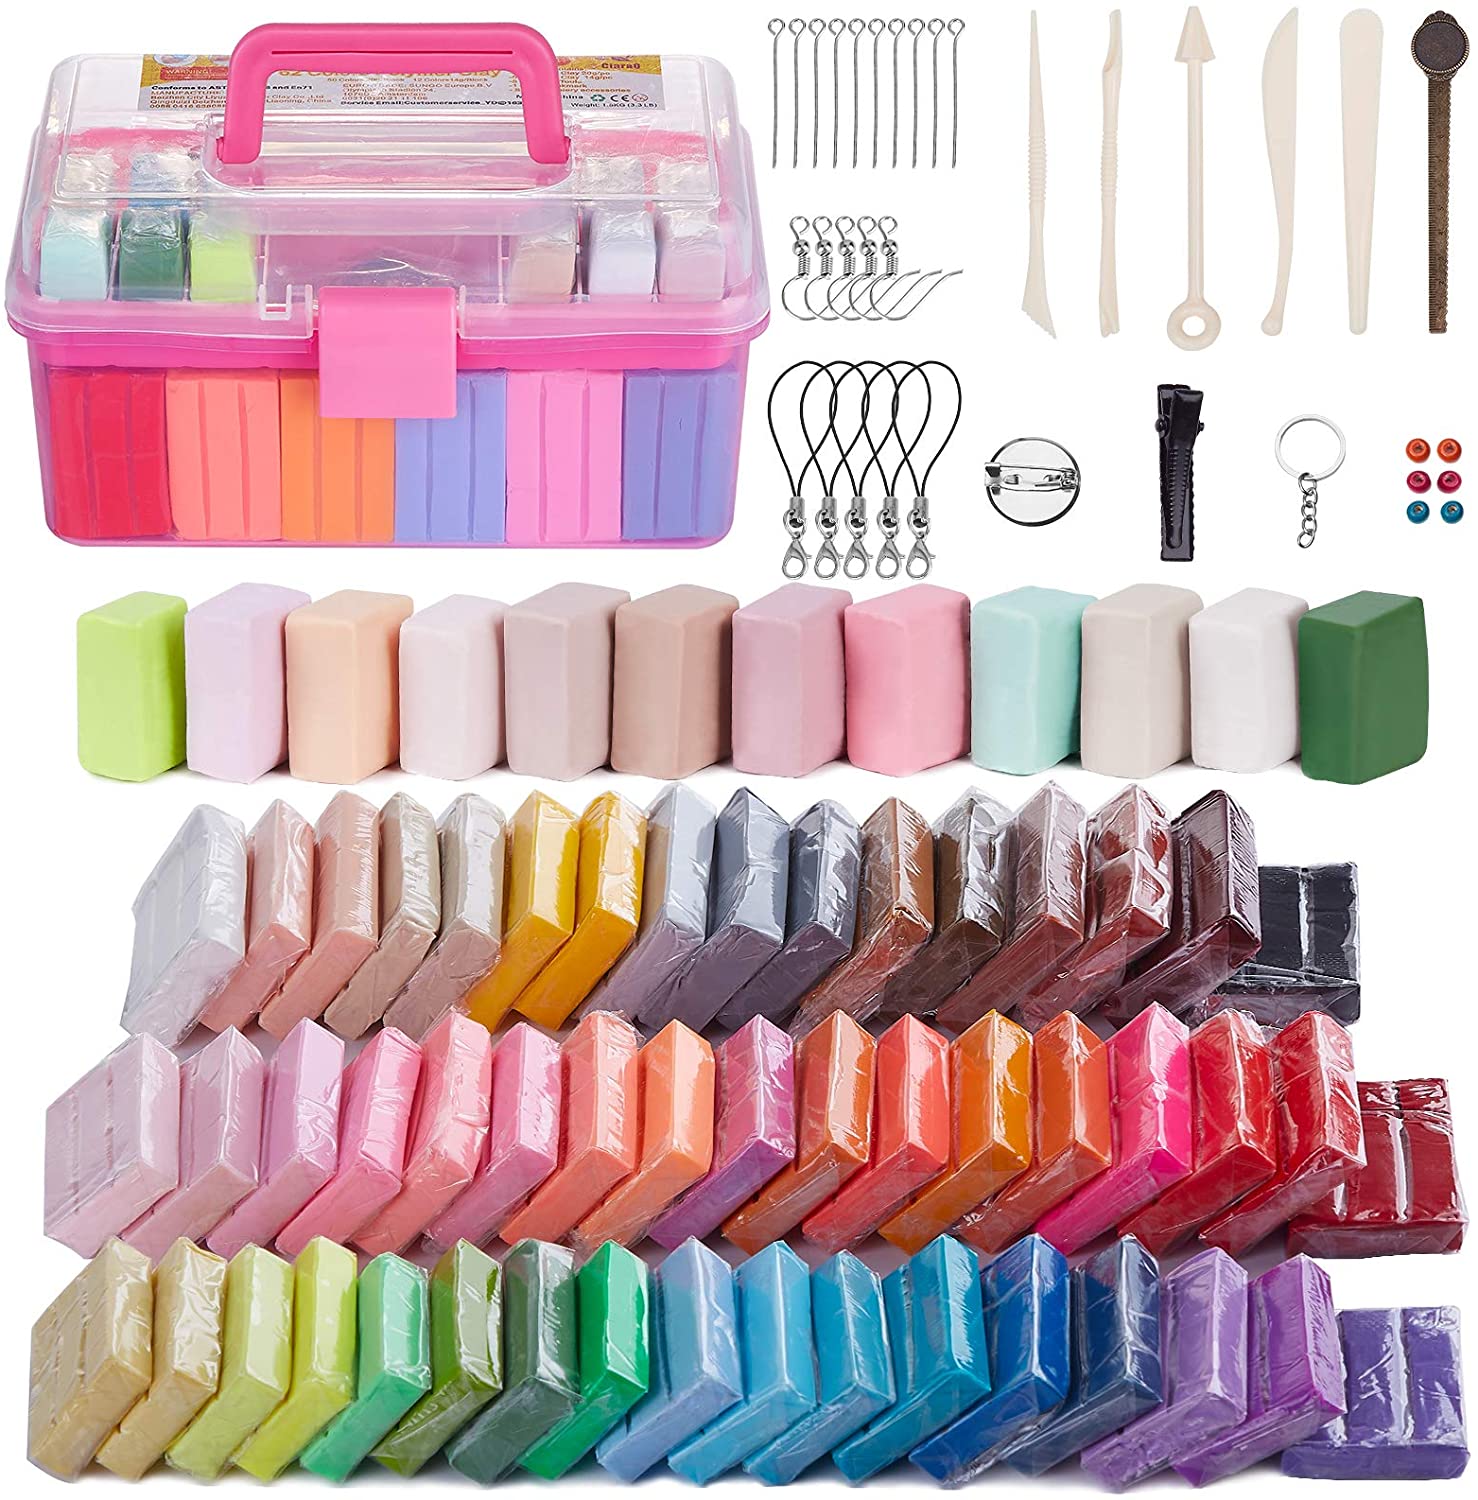 Bright Creations 79 Piece Polymer Clay Starter Kit, Oven Bake India